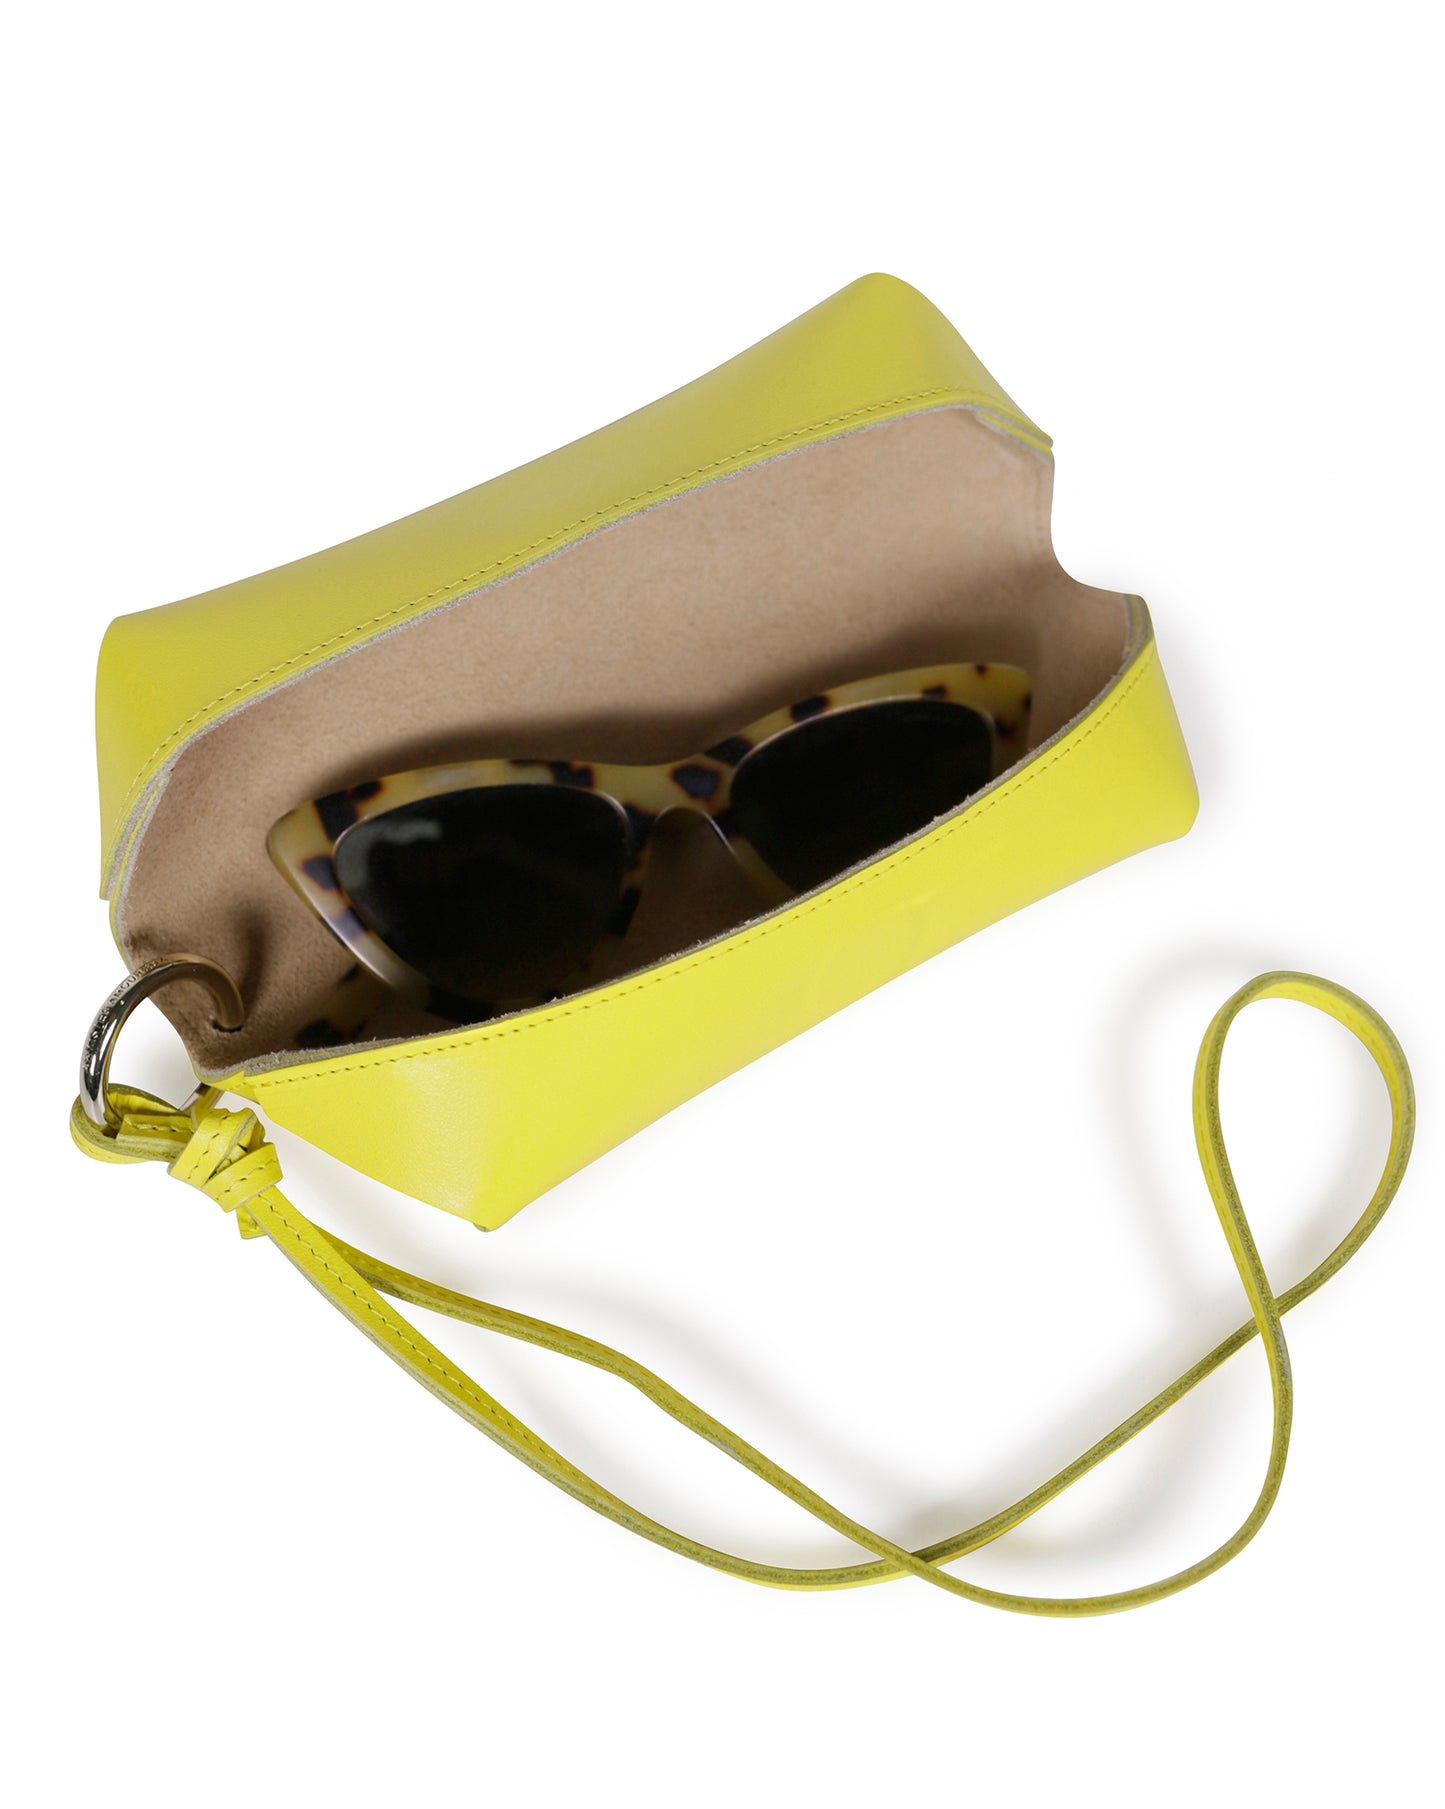 Sunglasses Case in Poussin